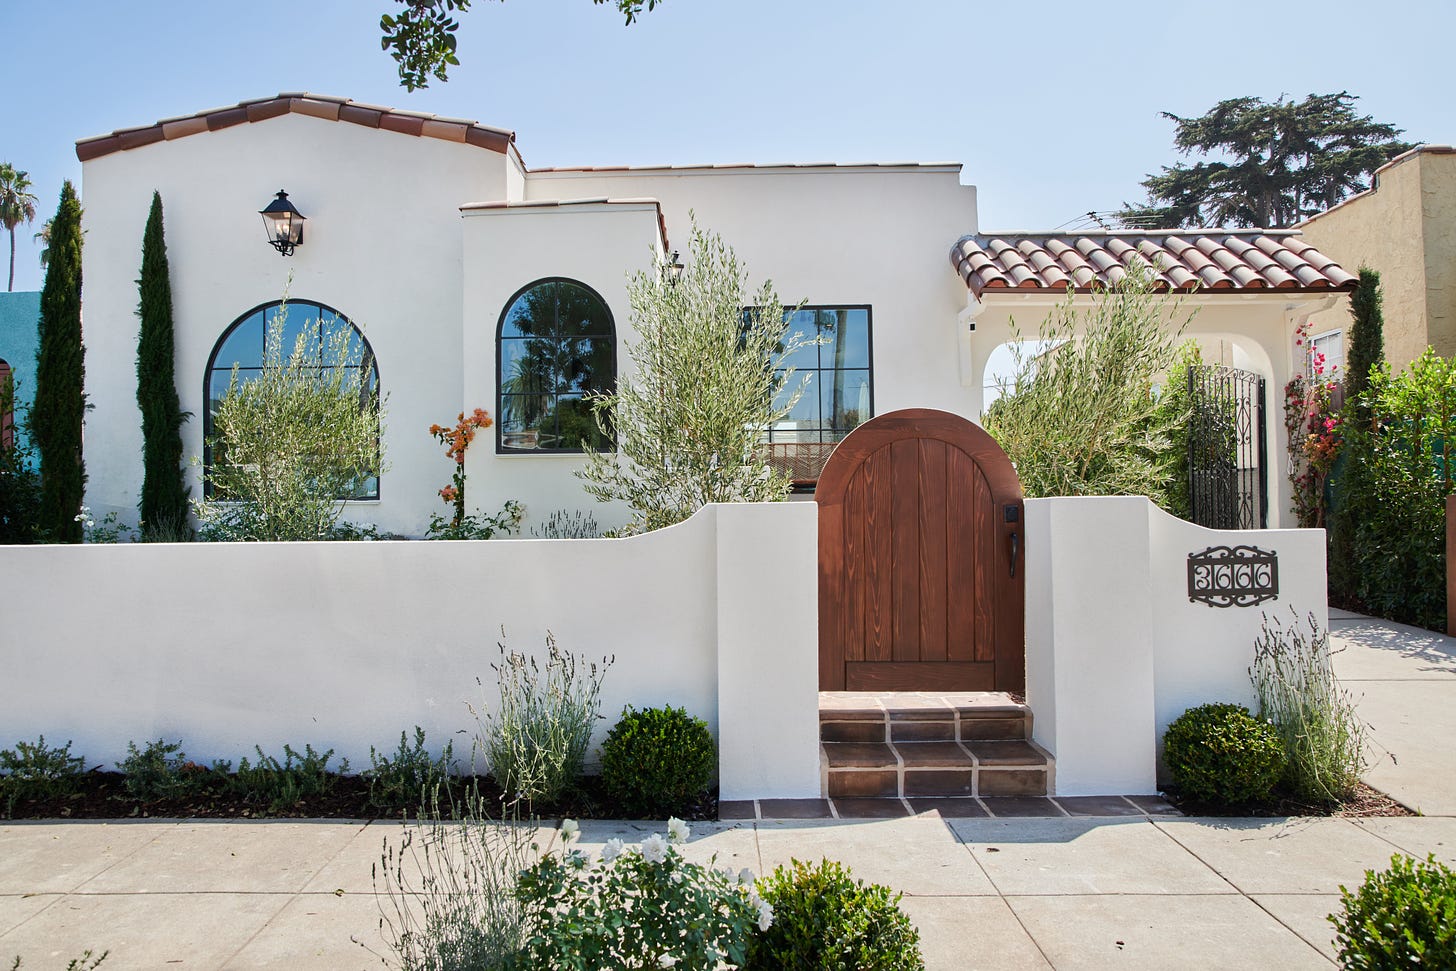 Home Tour: A Spanish Bungalow Remodel Inspired by Travel - Sunset